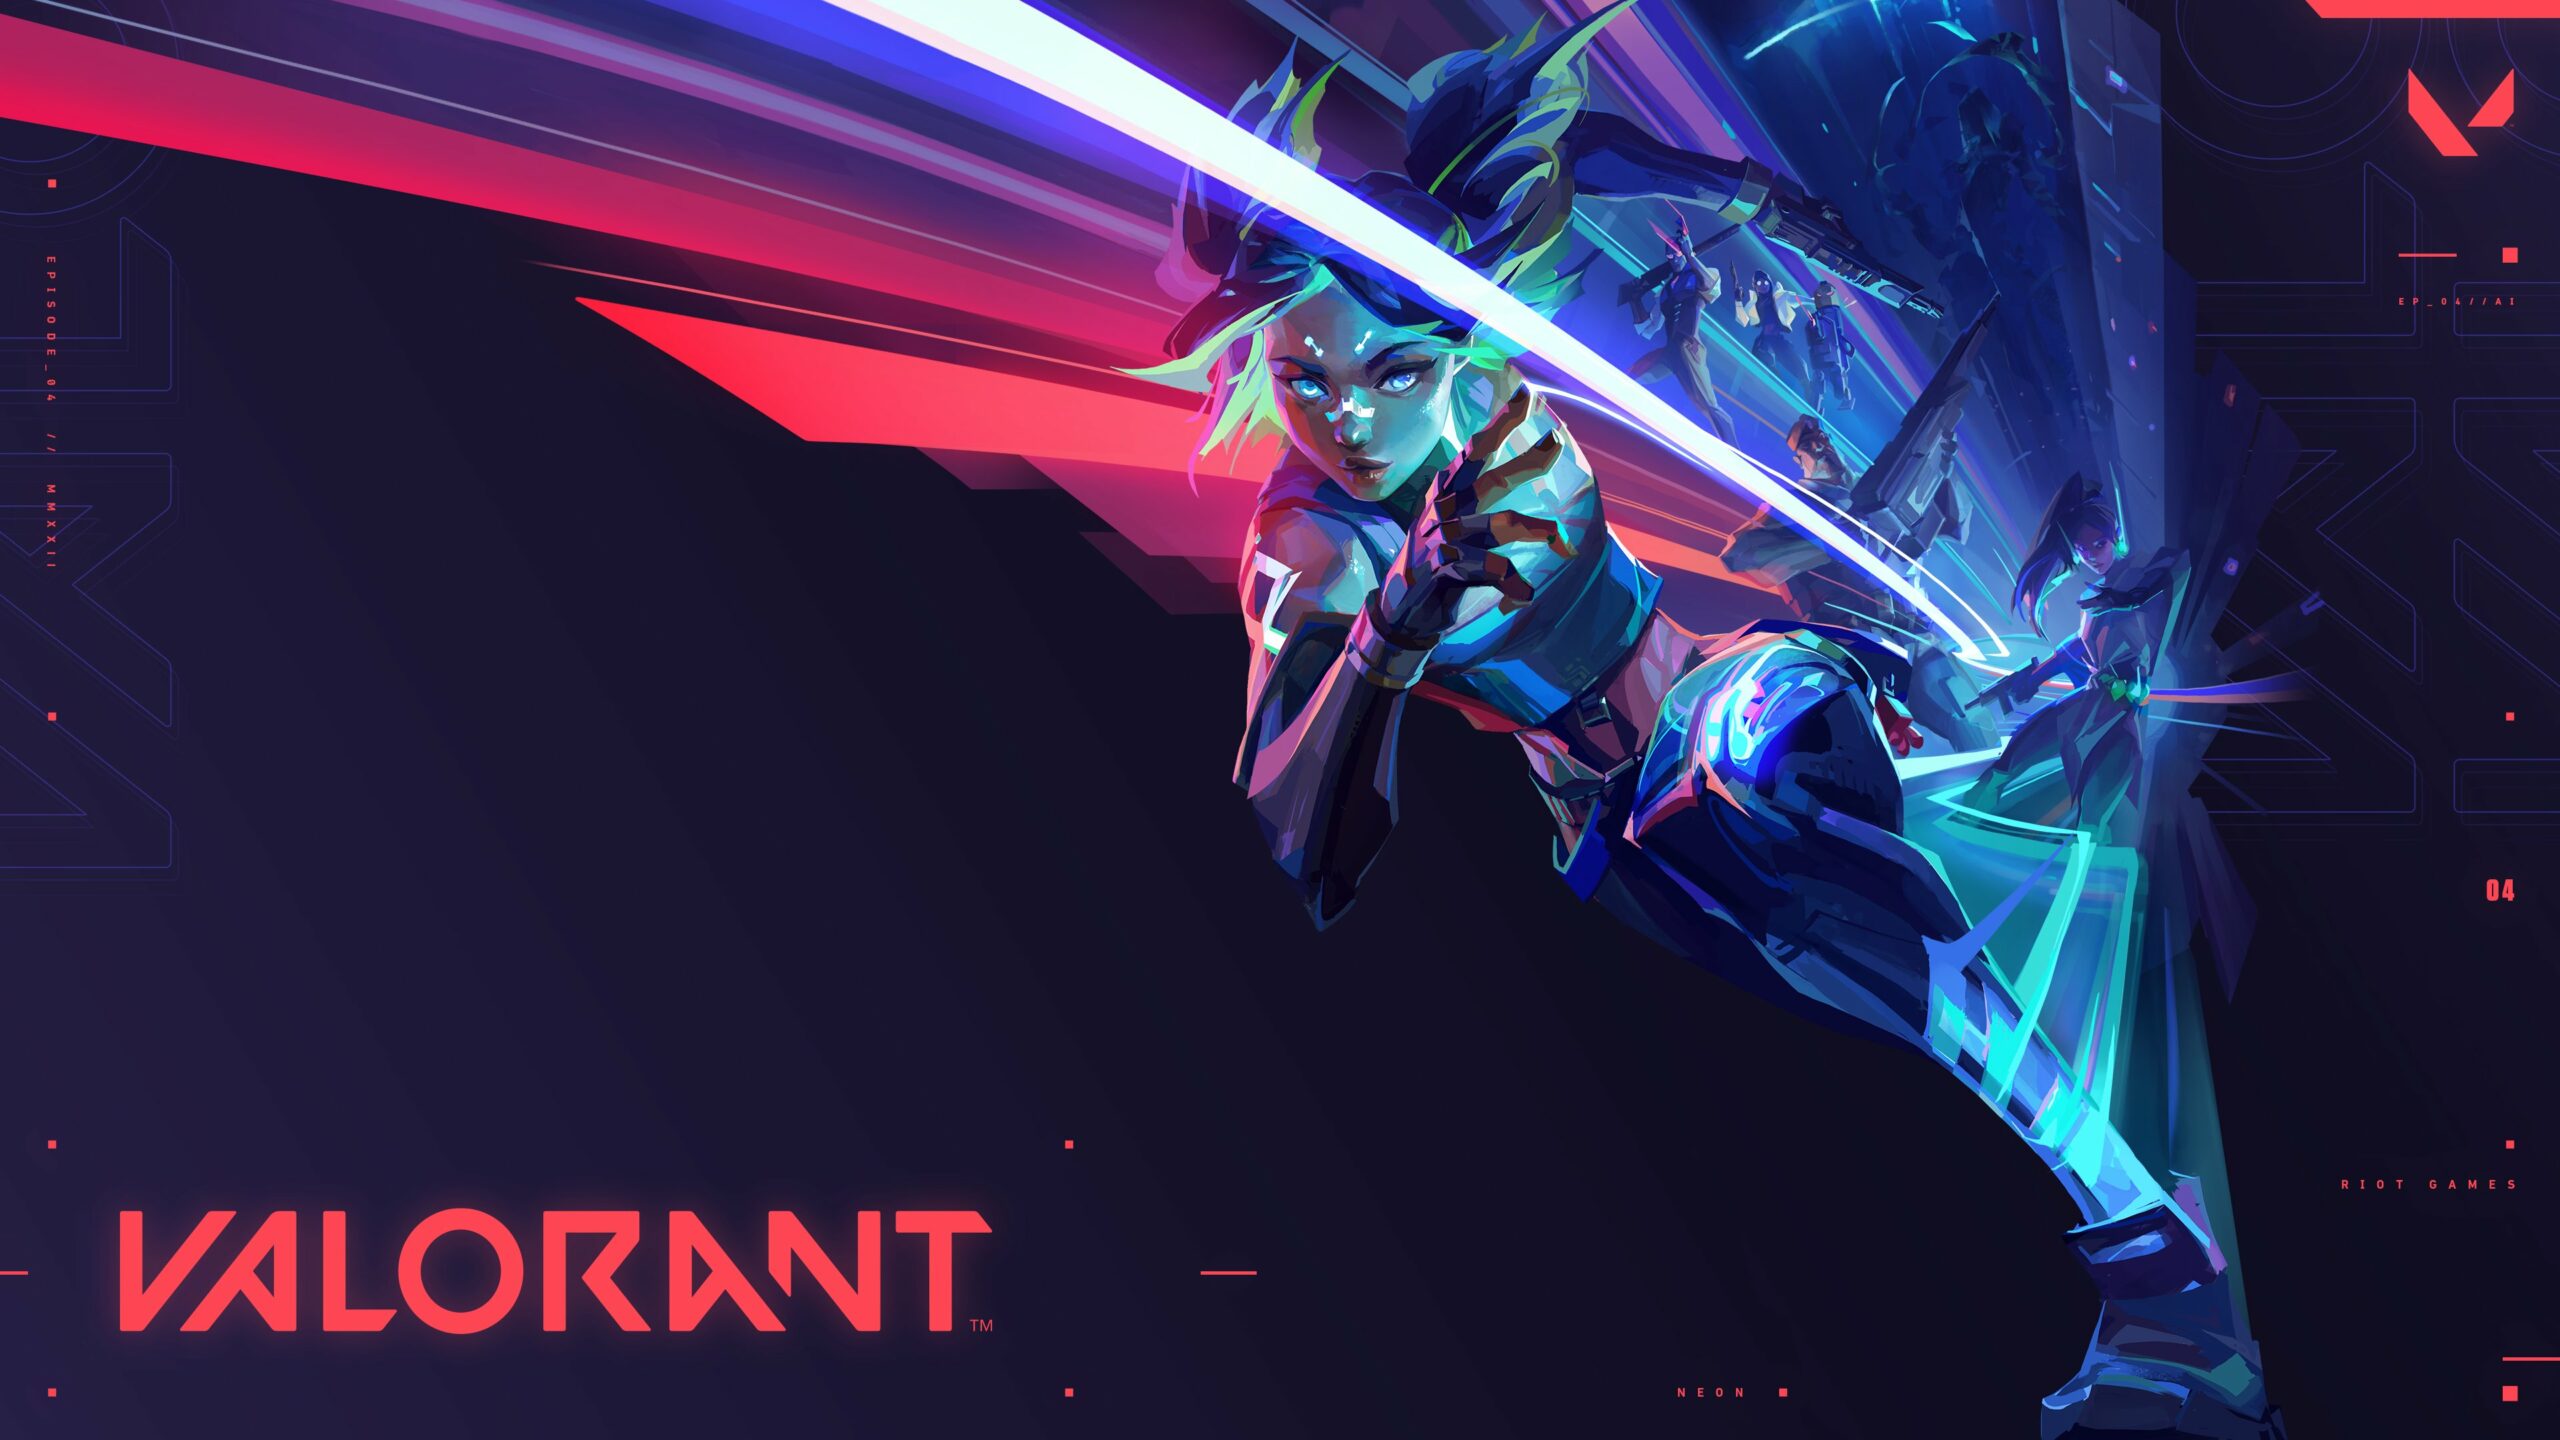 Valorant Officially Welcomes New Agent “Neon” after Leak